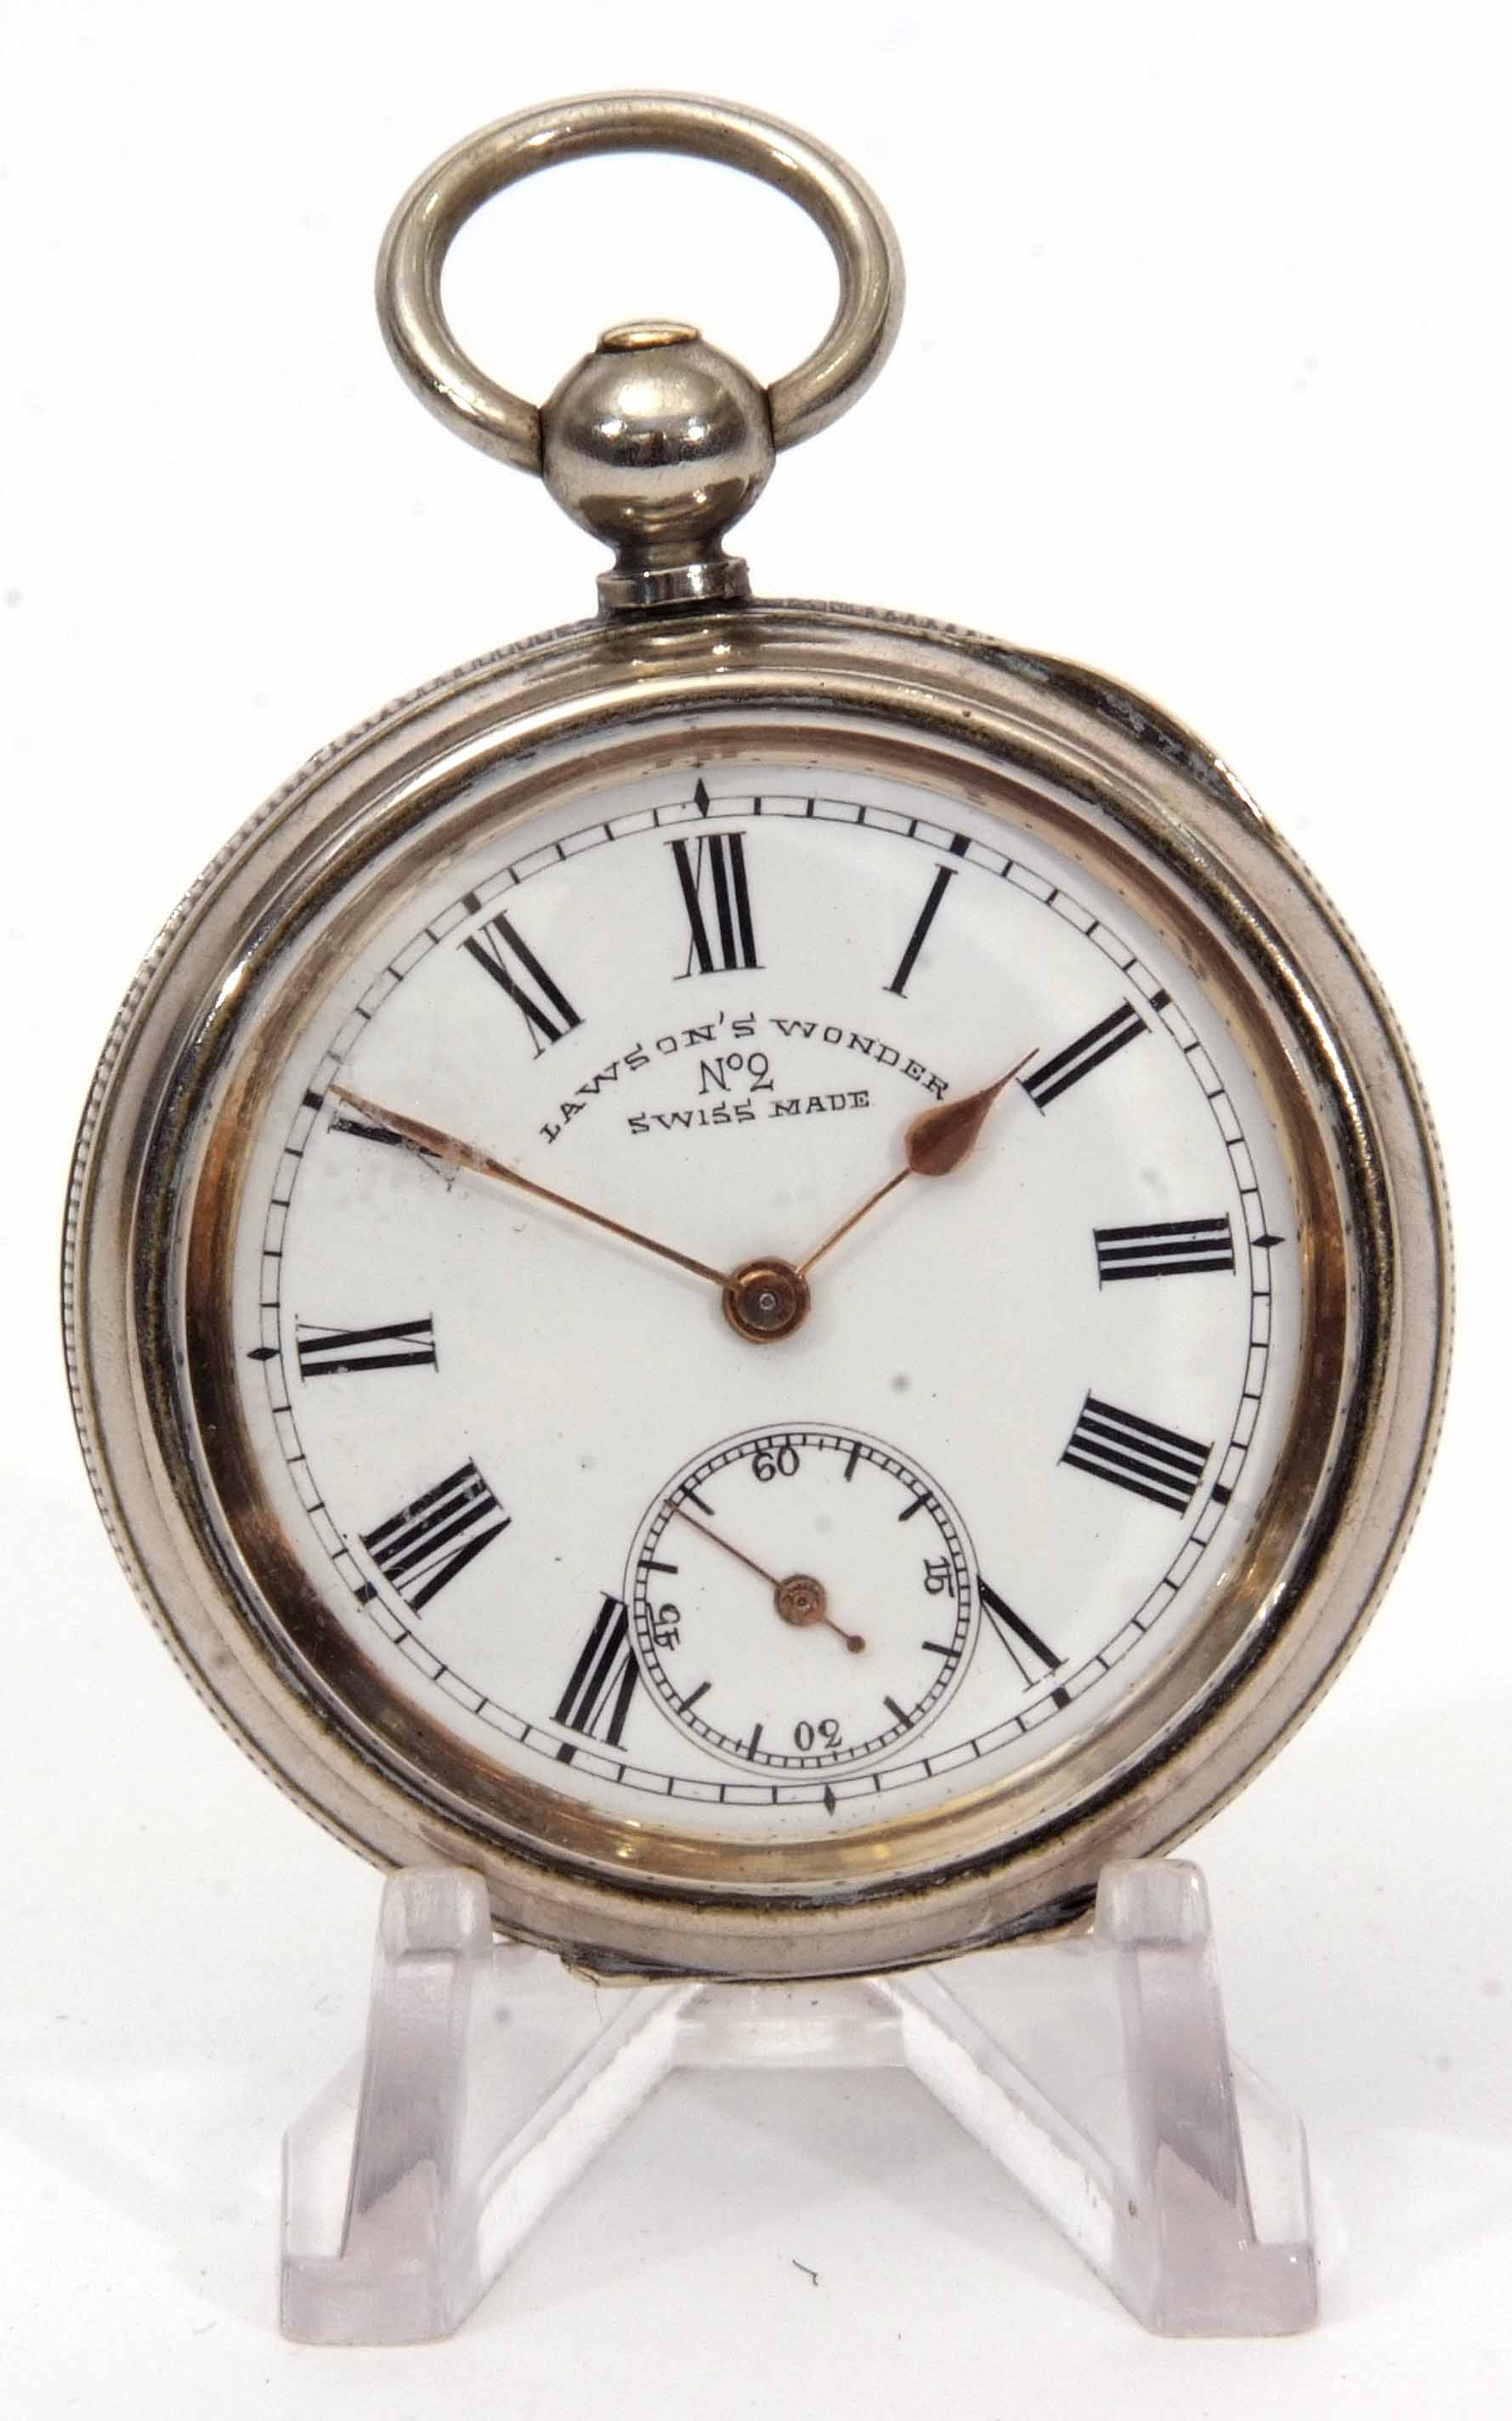 Late 19th century Swiss base metal cased open face cylinder watch, 162318, the frosted and gilt